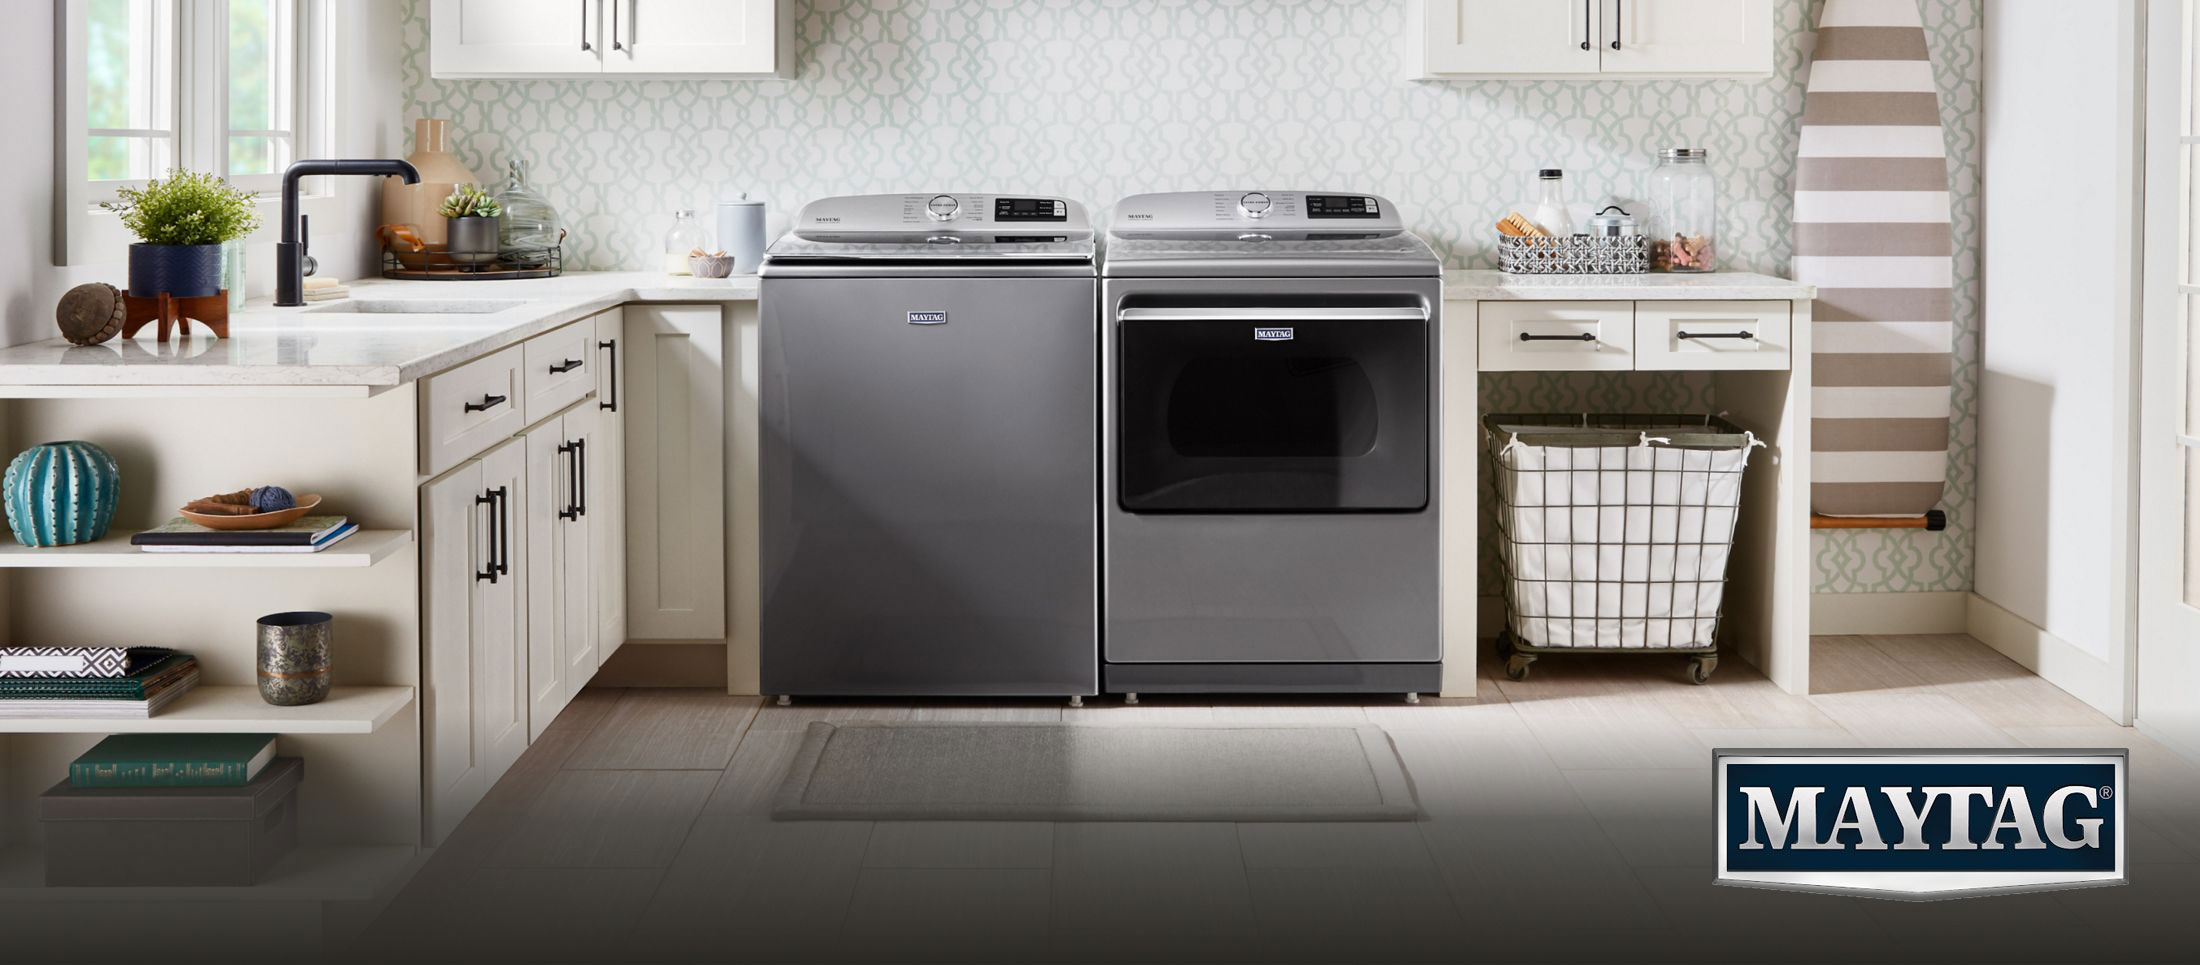 Maytag top-load washer and front-load dryer in designer laundry room